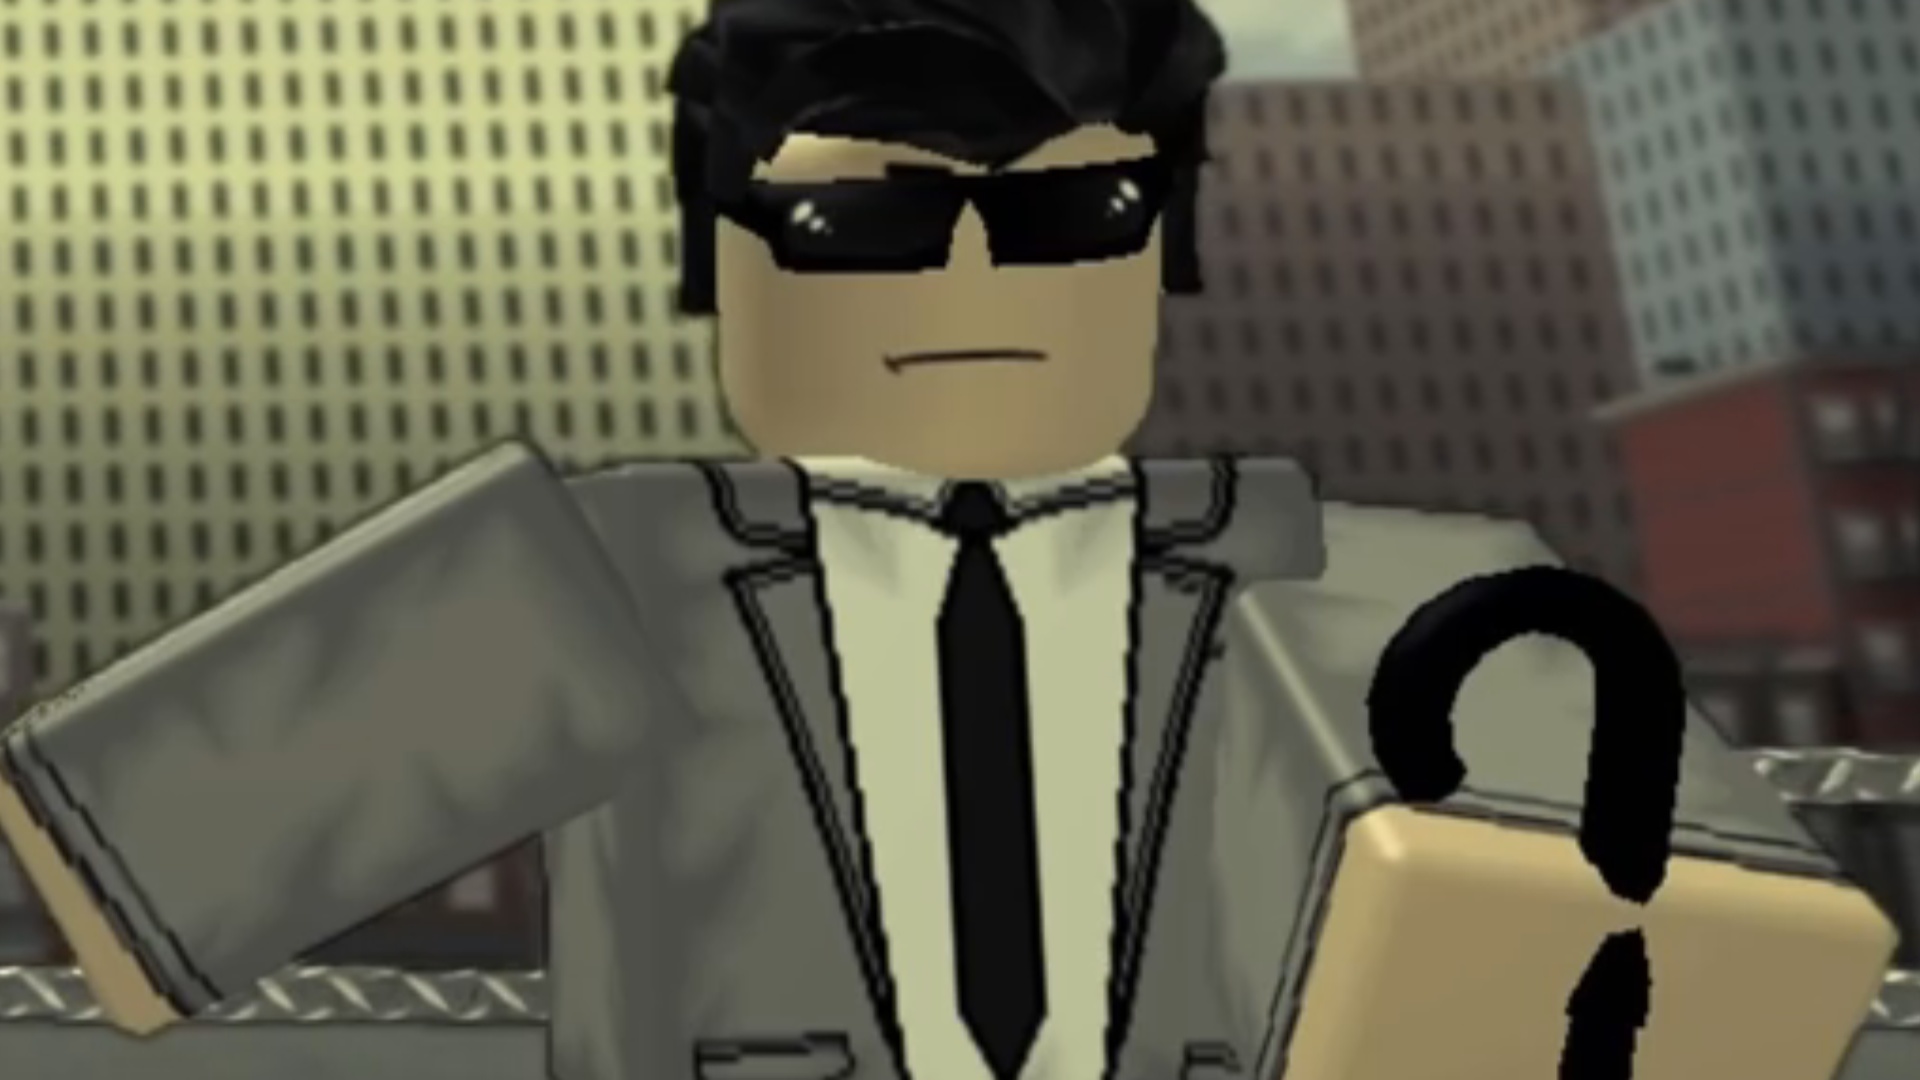 Jason Roblox Character - stone suit roblox